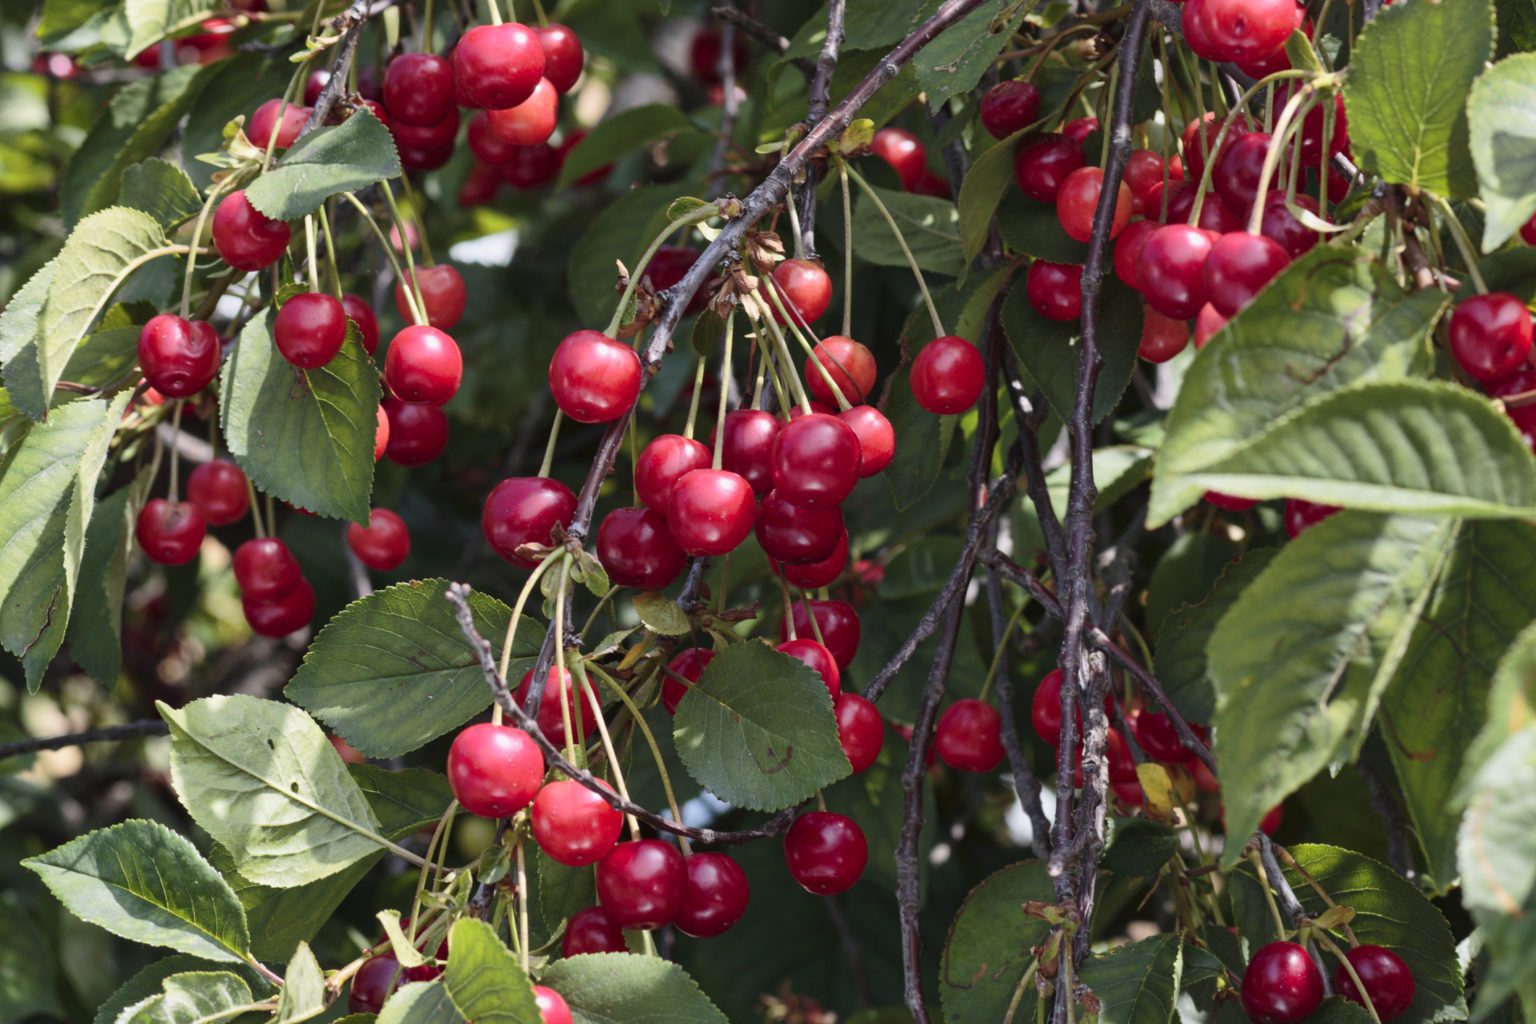 A final look at cherry exports